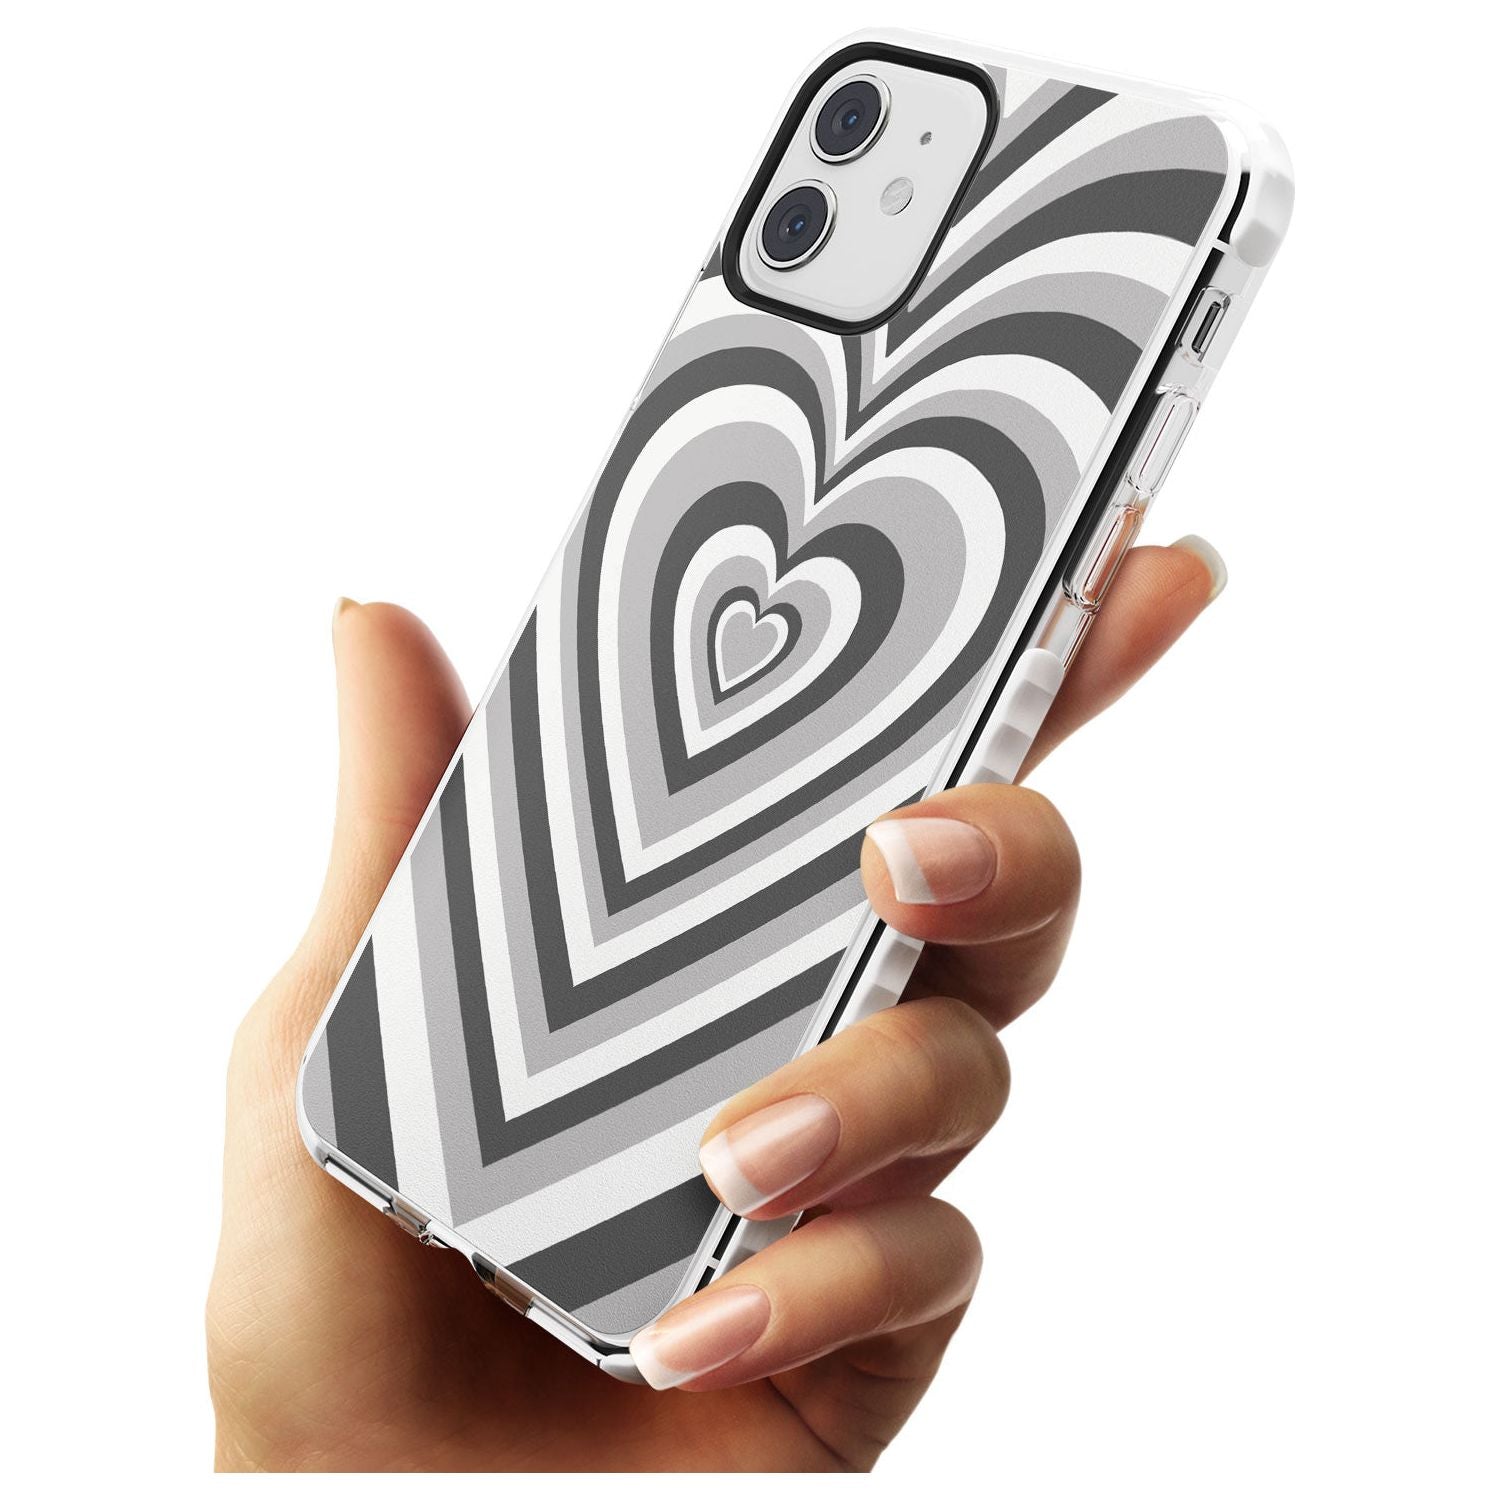 Monochrome Heart Illusion Impact Phone Case for iPhone 11